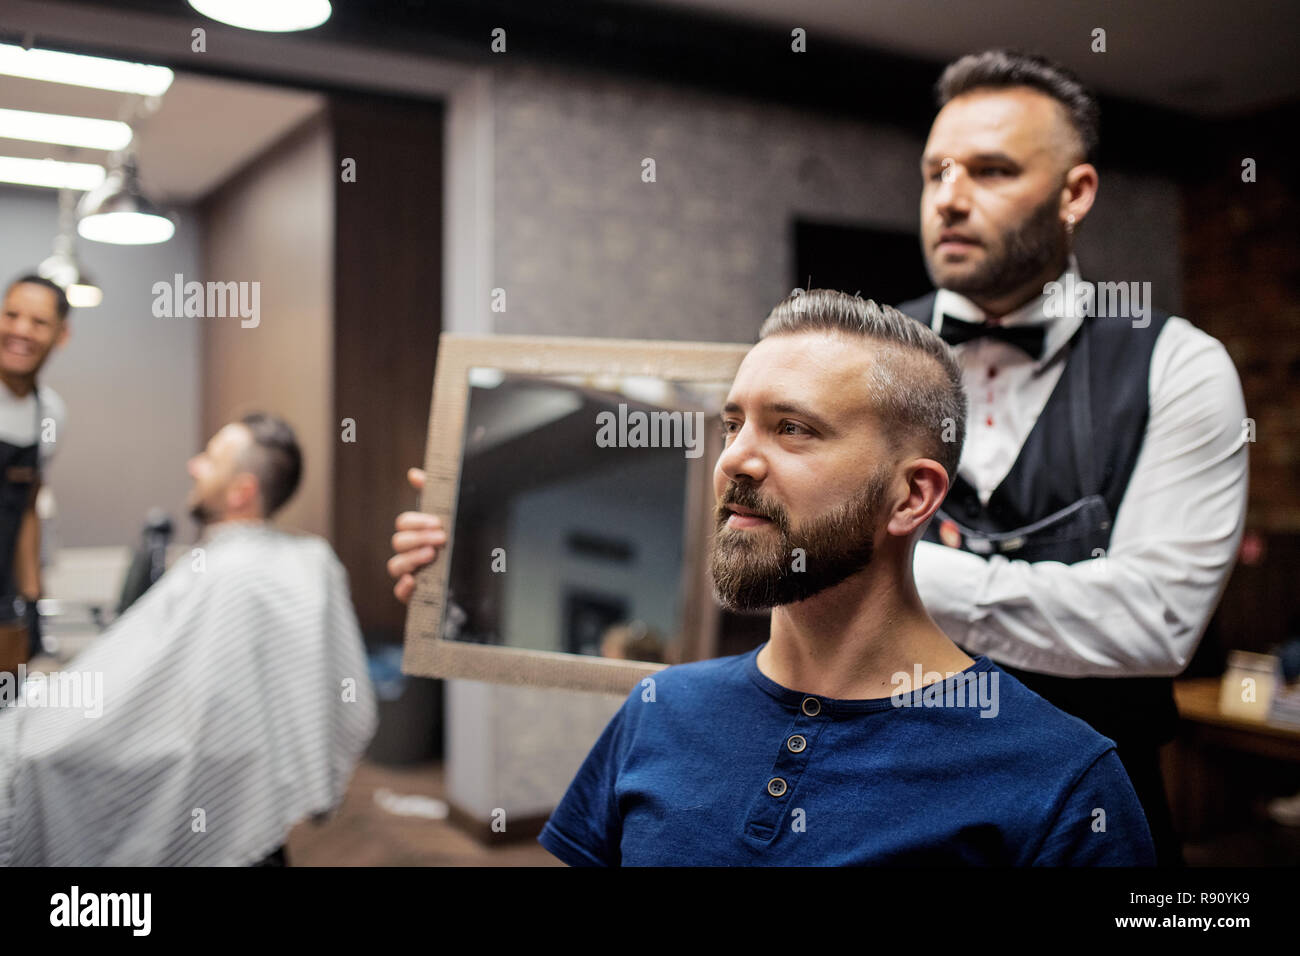 Handsome hipster man client visiting haidresser and hairstylist in barber shop. Stock Photo